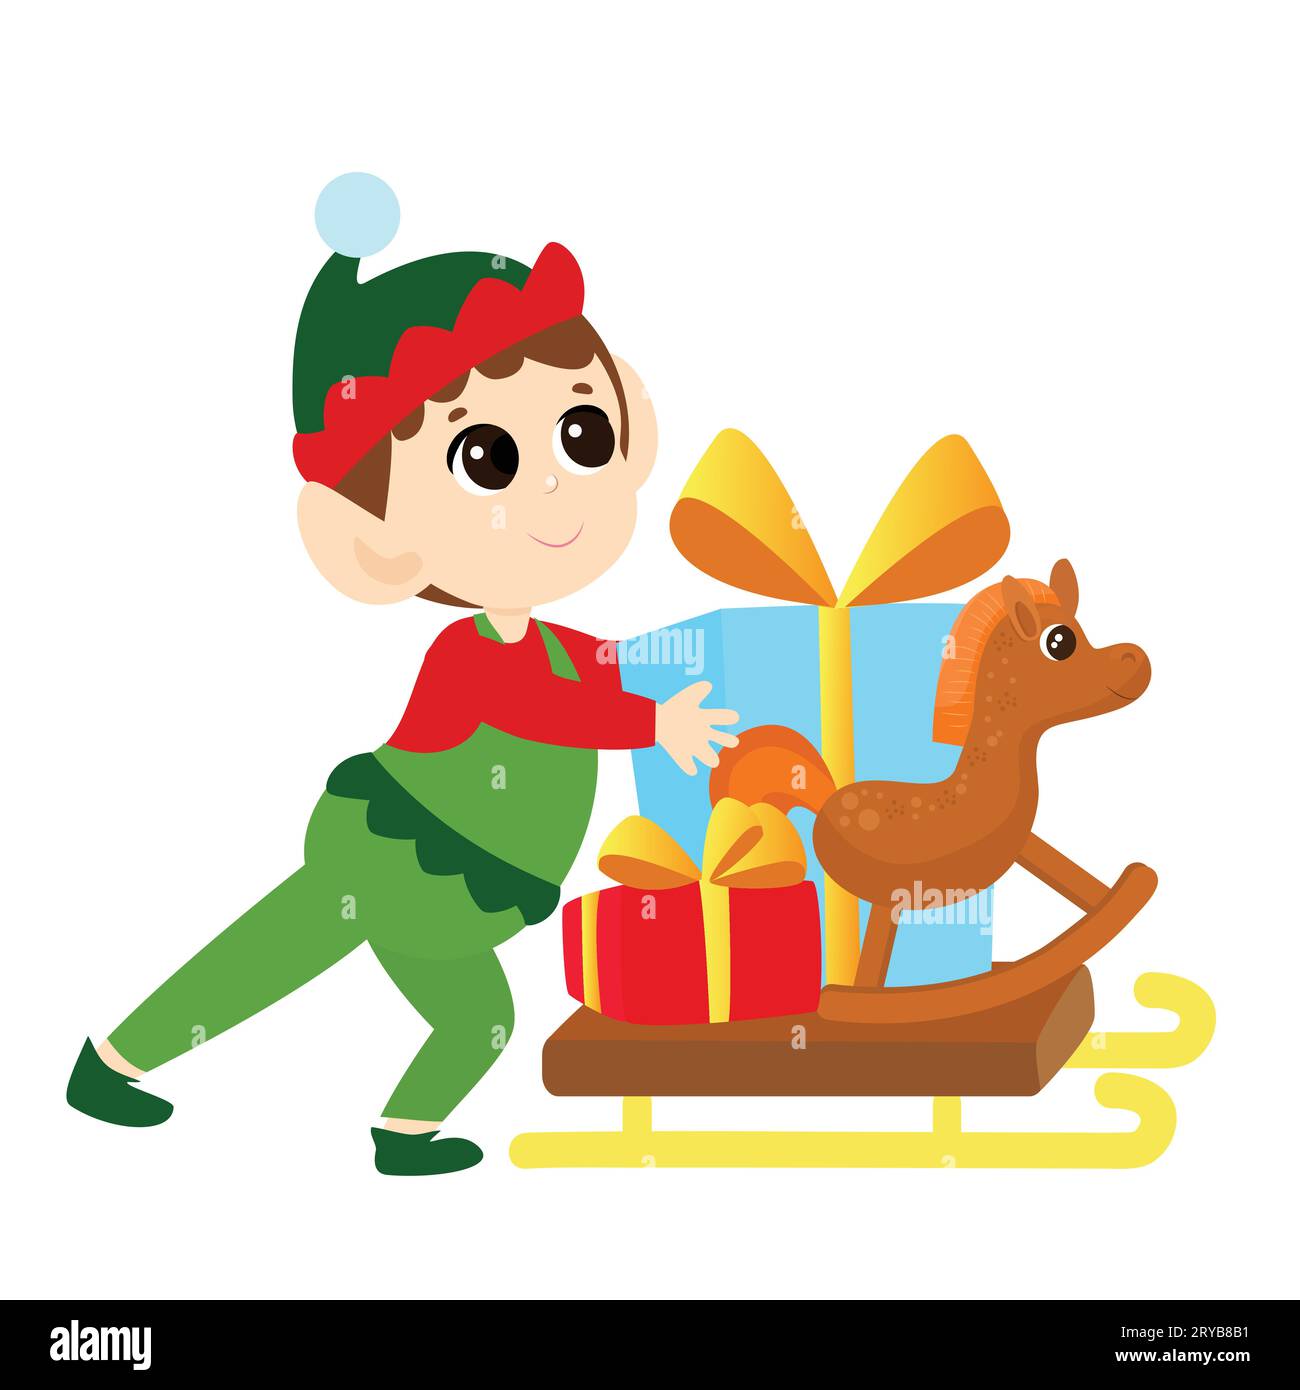 An elf boy carries a sleigh with Christmas presents. The child is happy and dressed in a traditional elf costume. Festive illustration. Stock Vector